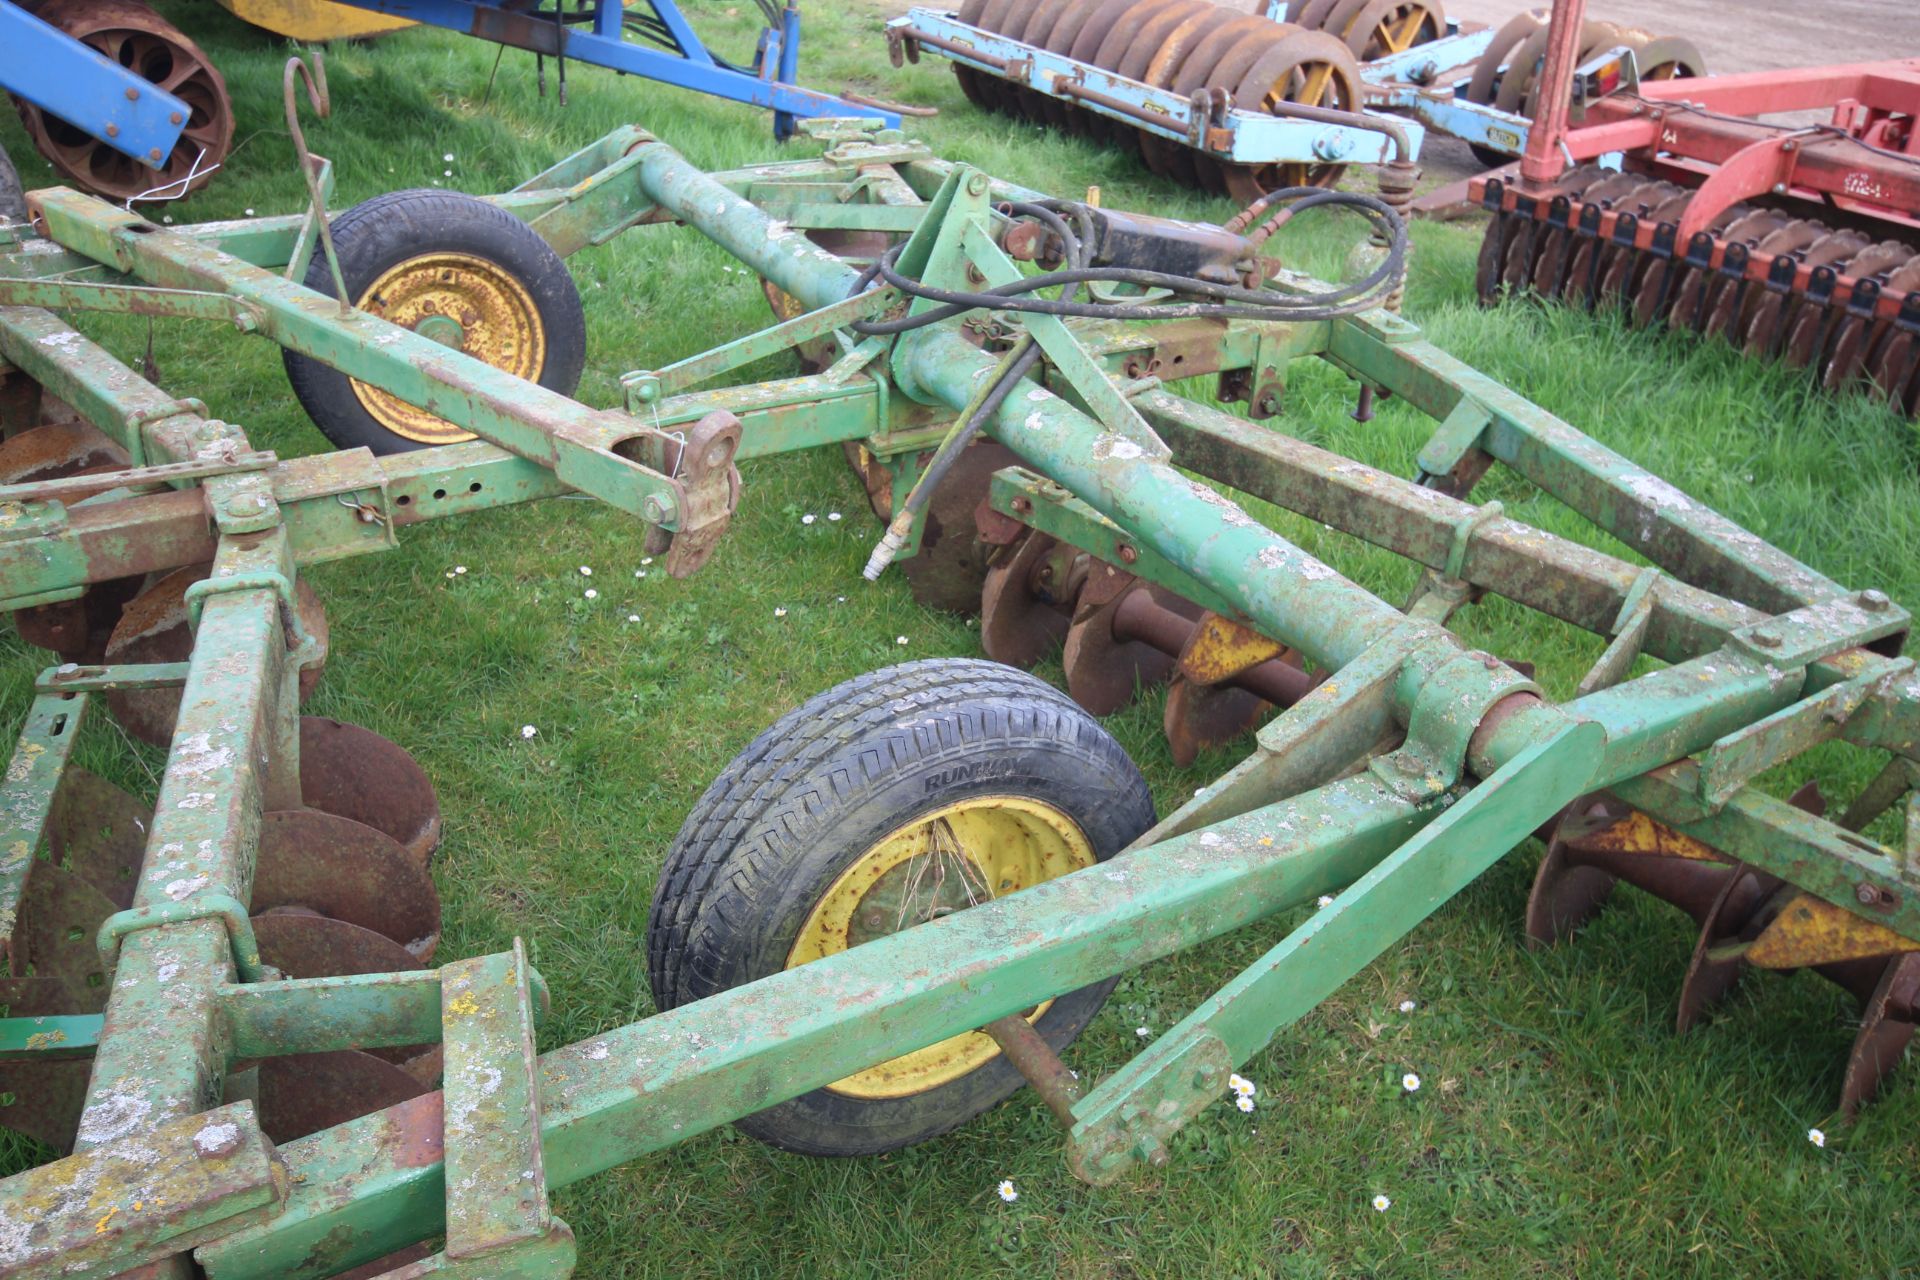 John Deere 3.5m trailed discs. For sale due to retirement. V - Image 11 of 15